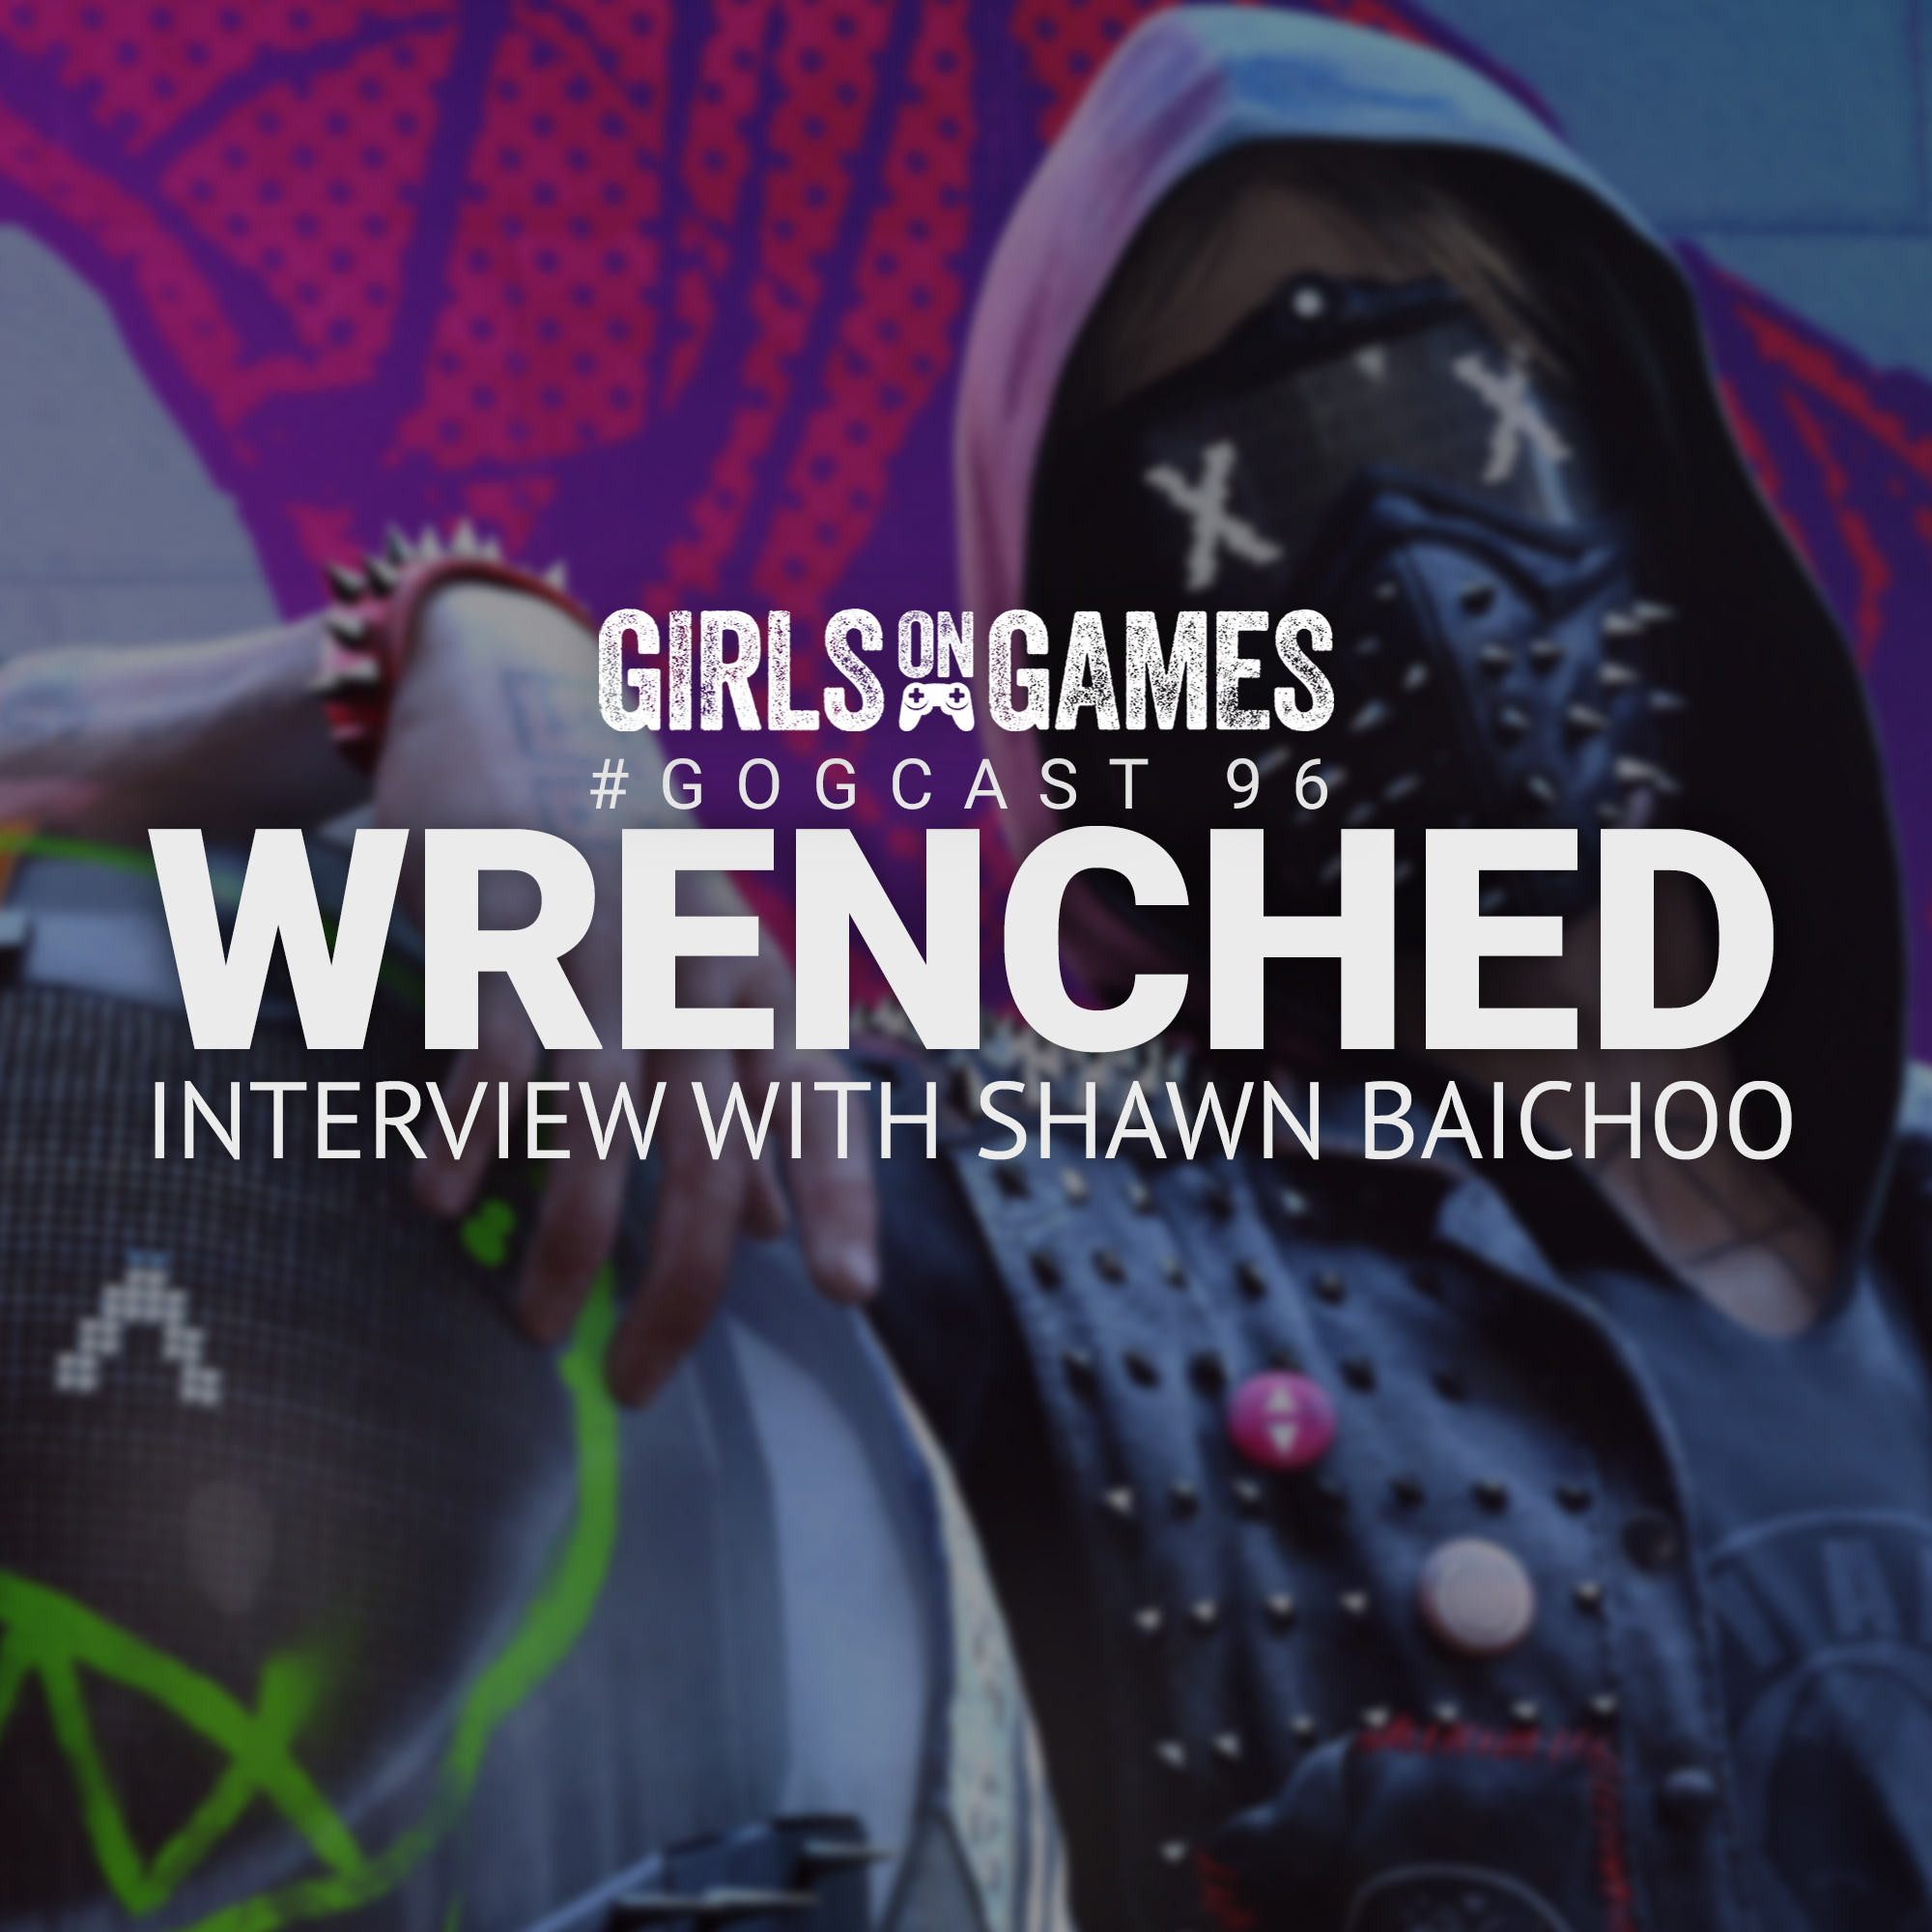 GoGCast 96: Wrenched - Interview with Shawn Baichoo